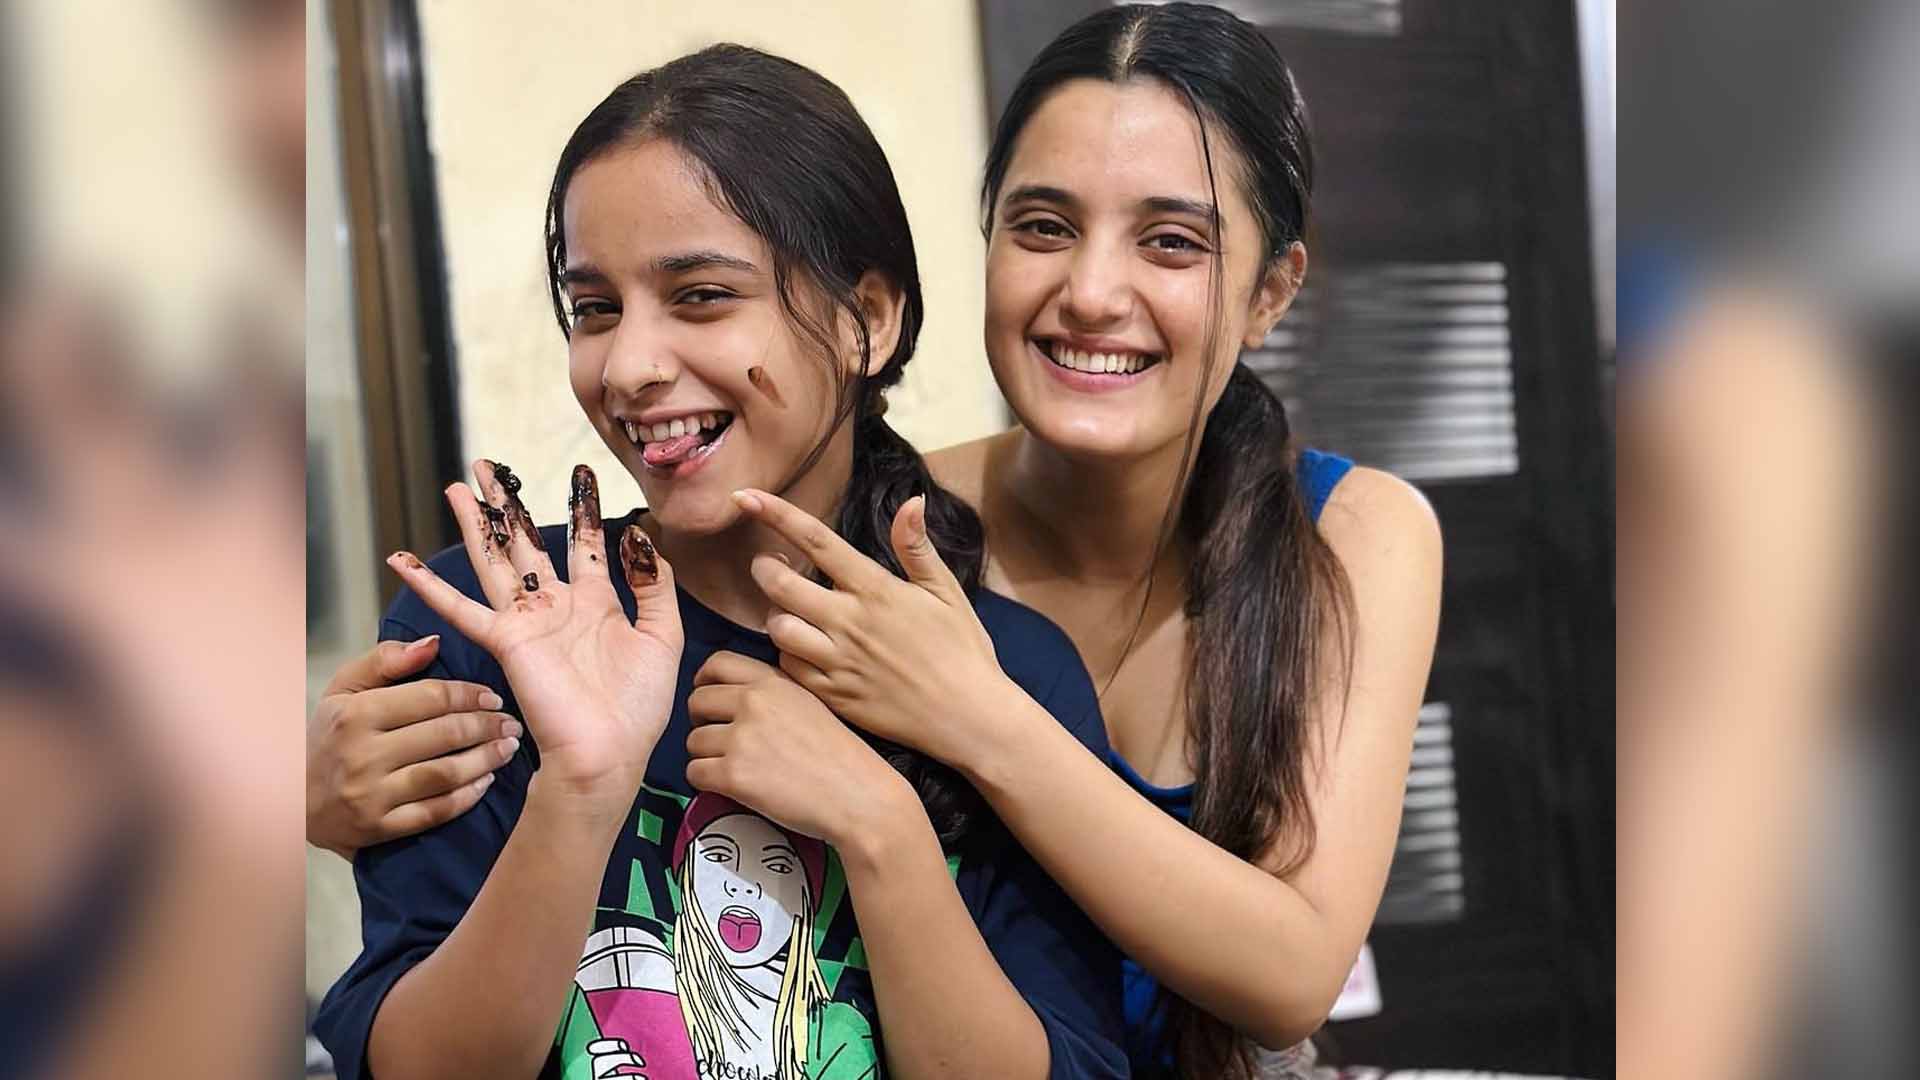 Ayushi Khurana from Star Bharat’s ‘Ajooni’ gave a surprise visit to her hometown to Reunite with her Family